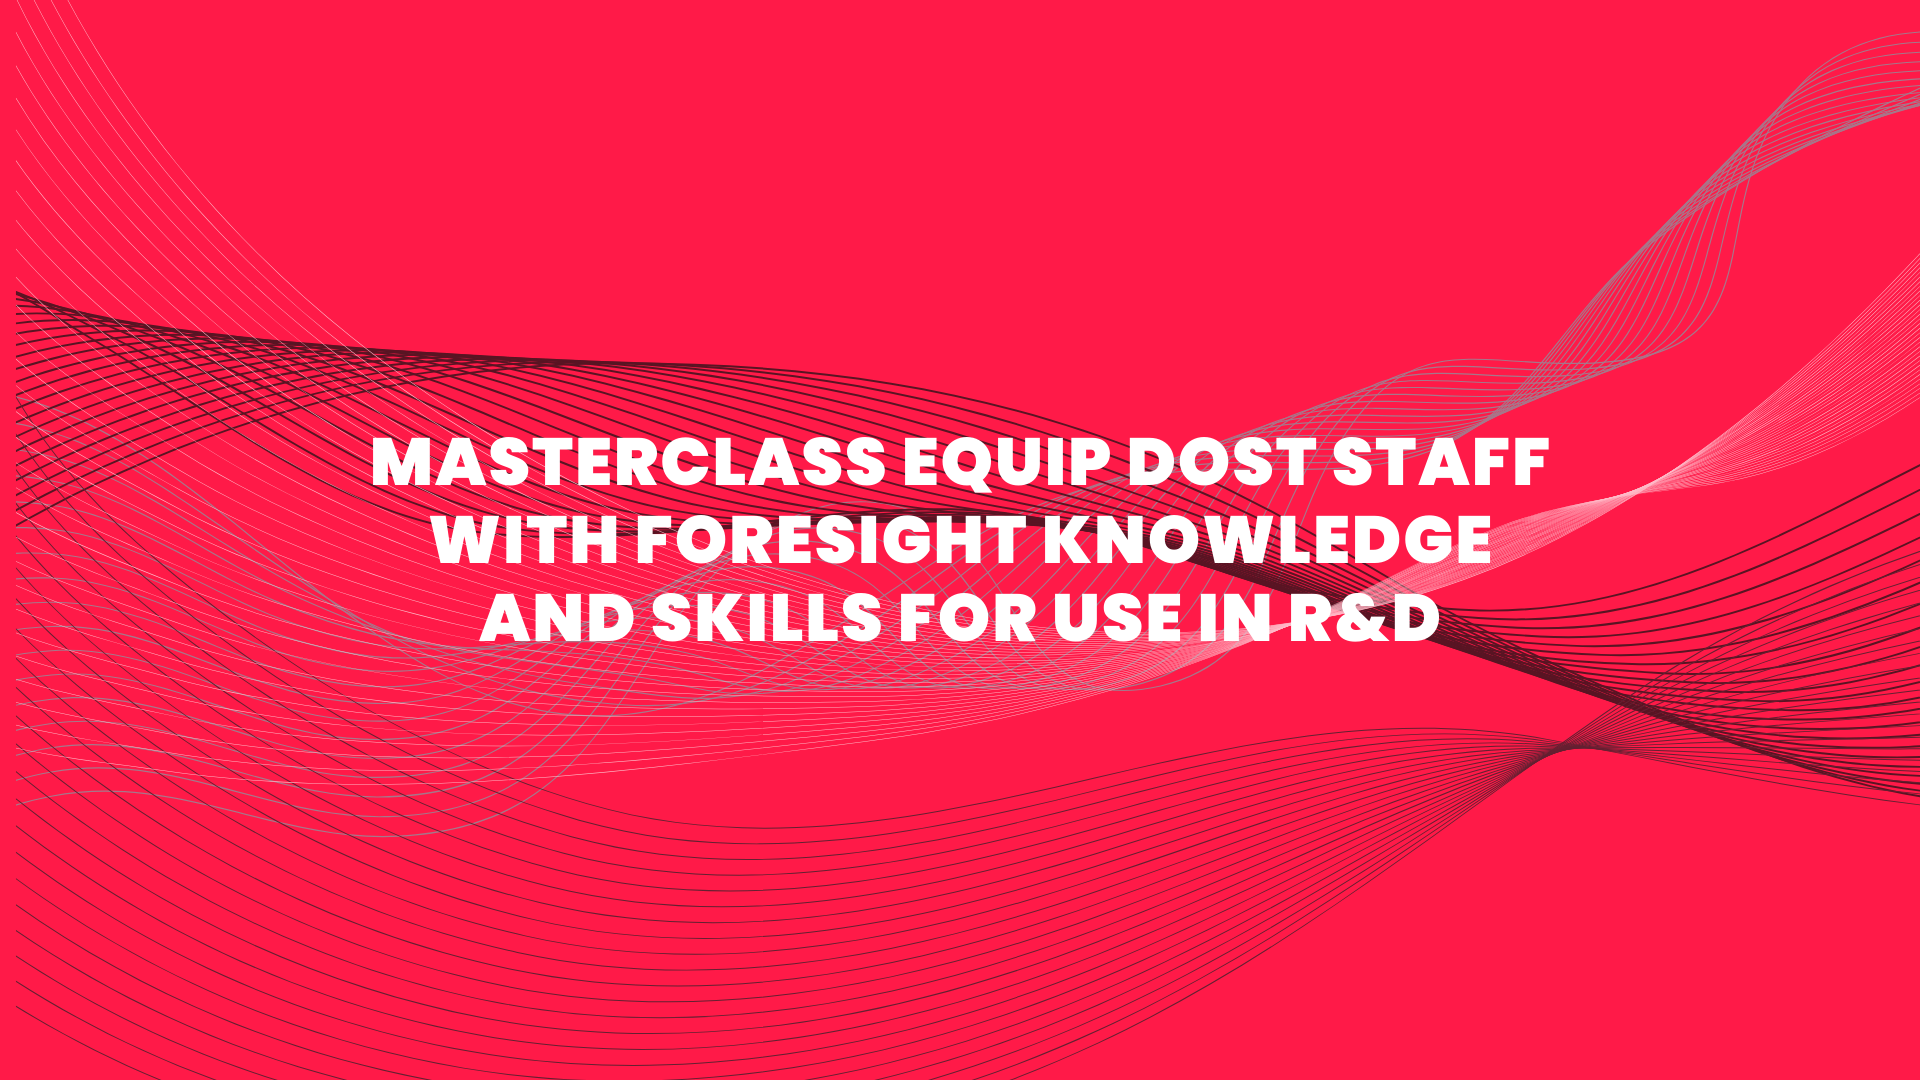 Masterclass equip DOST staff with foresight knowledge and skills for use in R&D